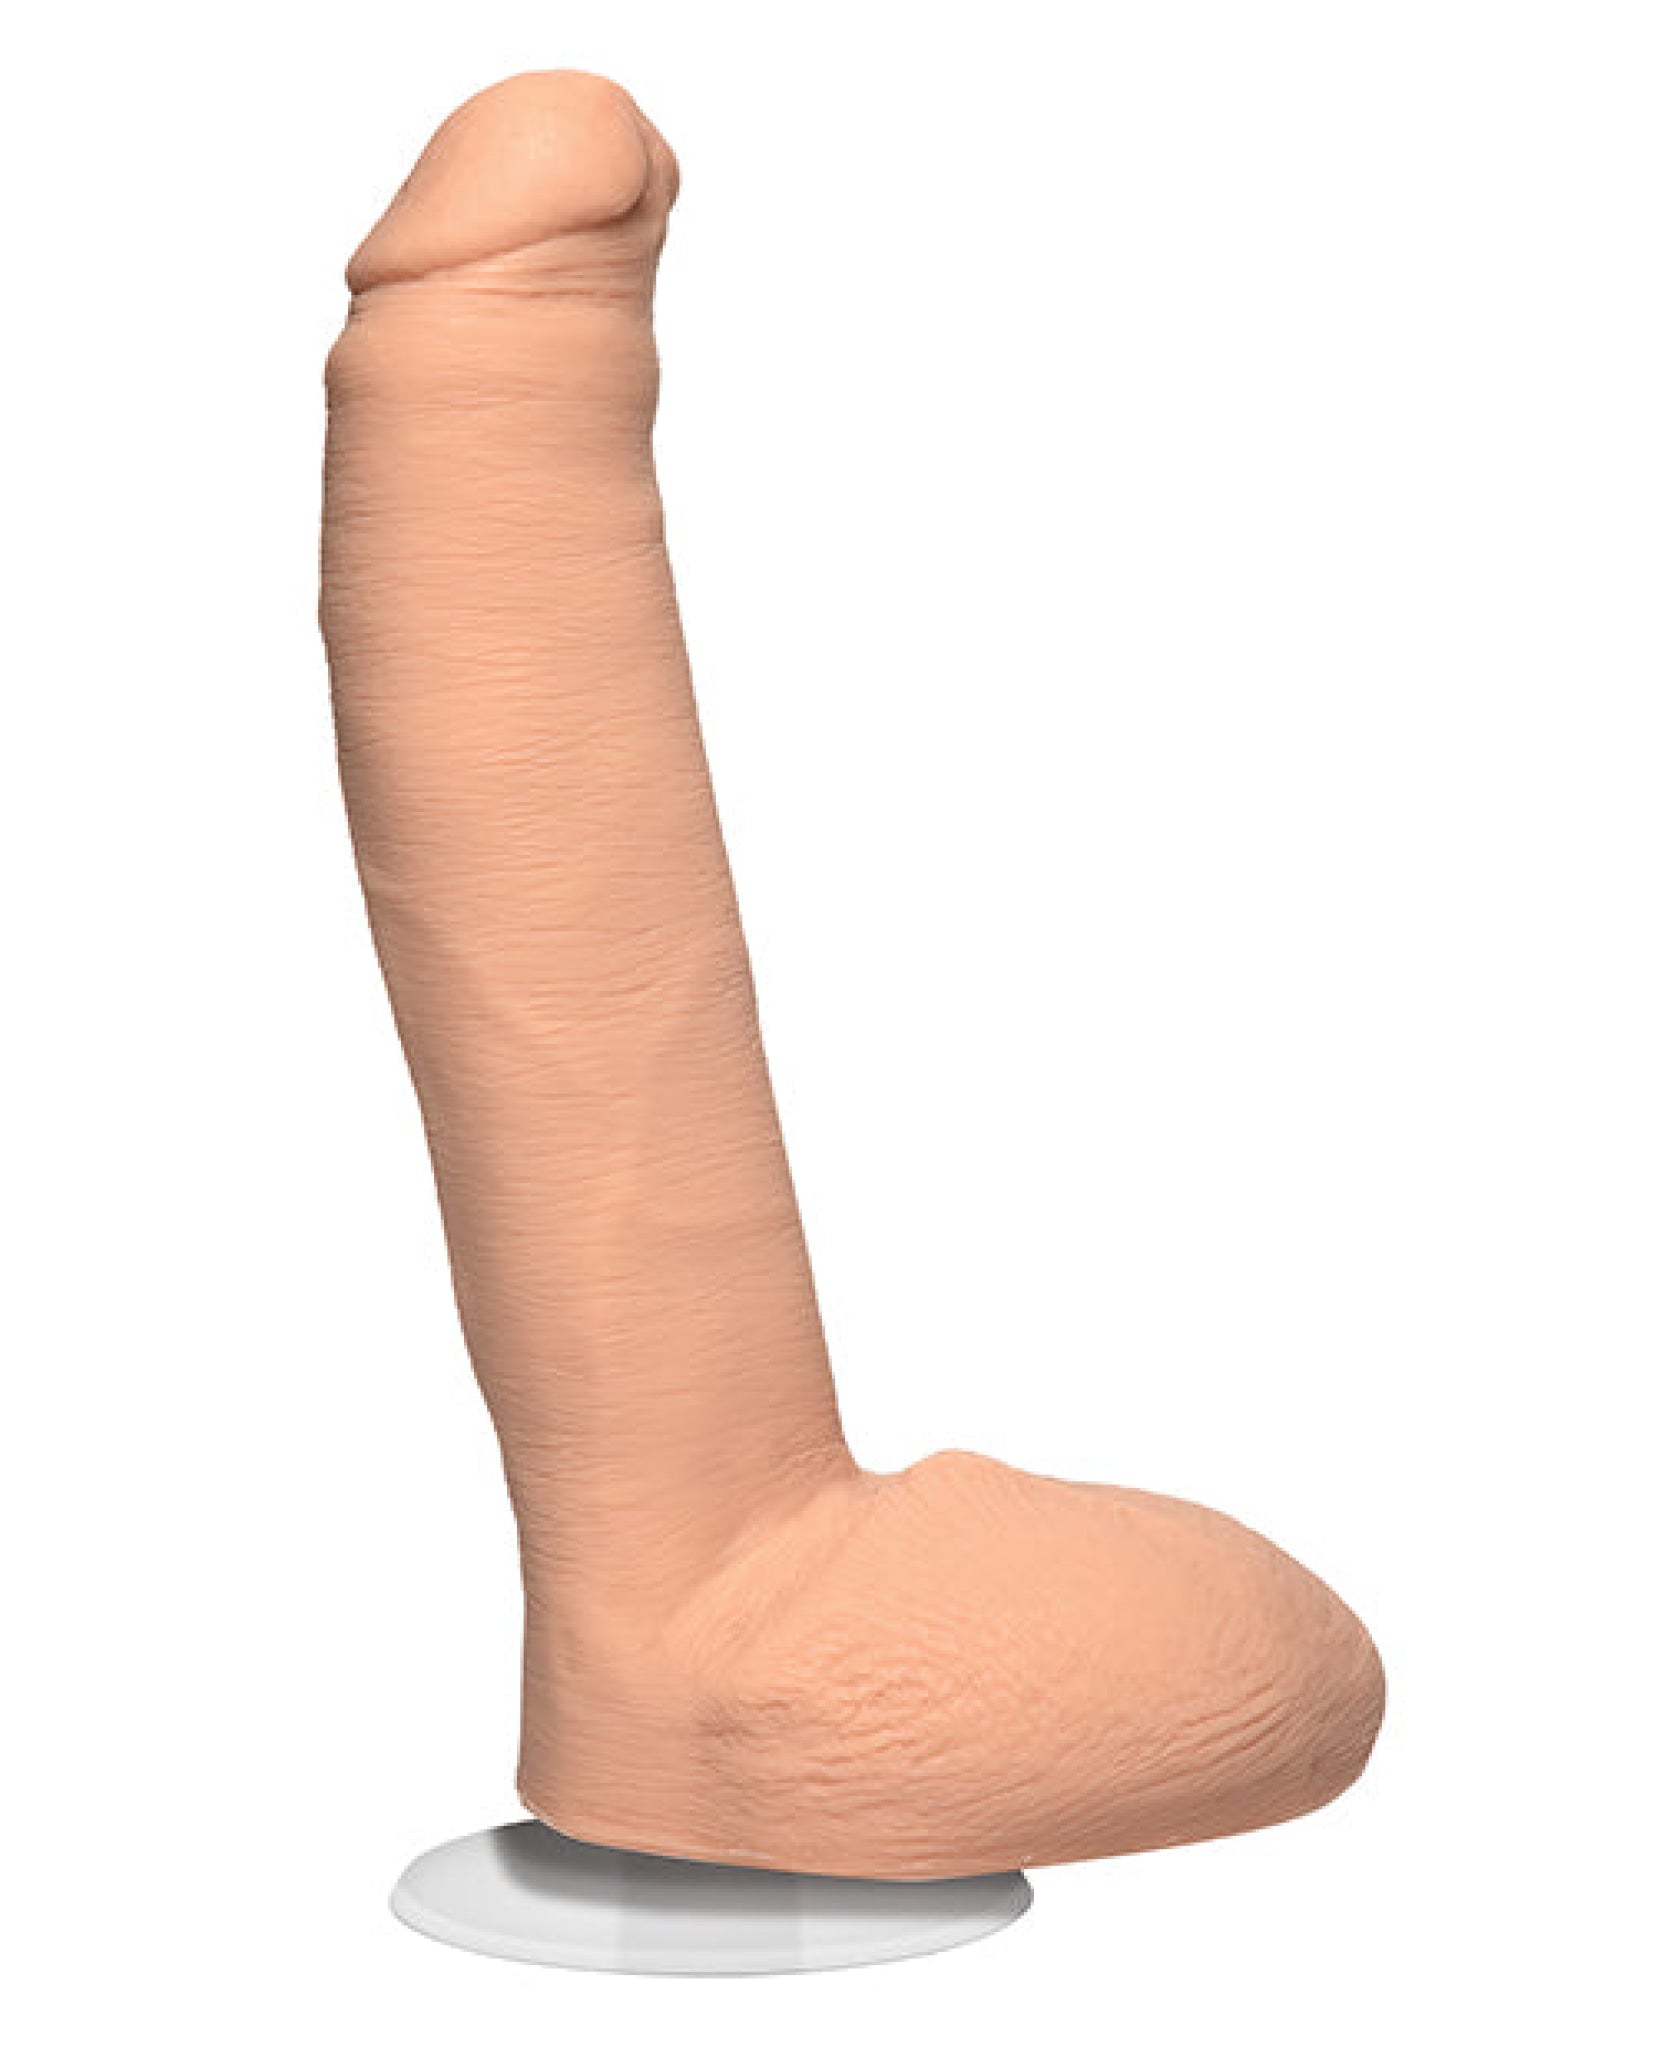 Signature Cocks Ultraskyn 7.5" Cock W-removable Vac-u-lock Suction Cup - Tommy Pistol Doc Johnson